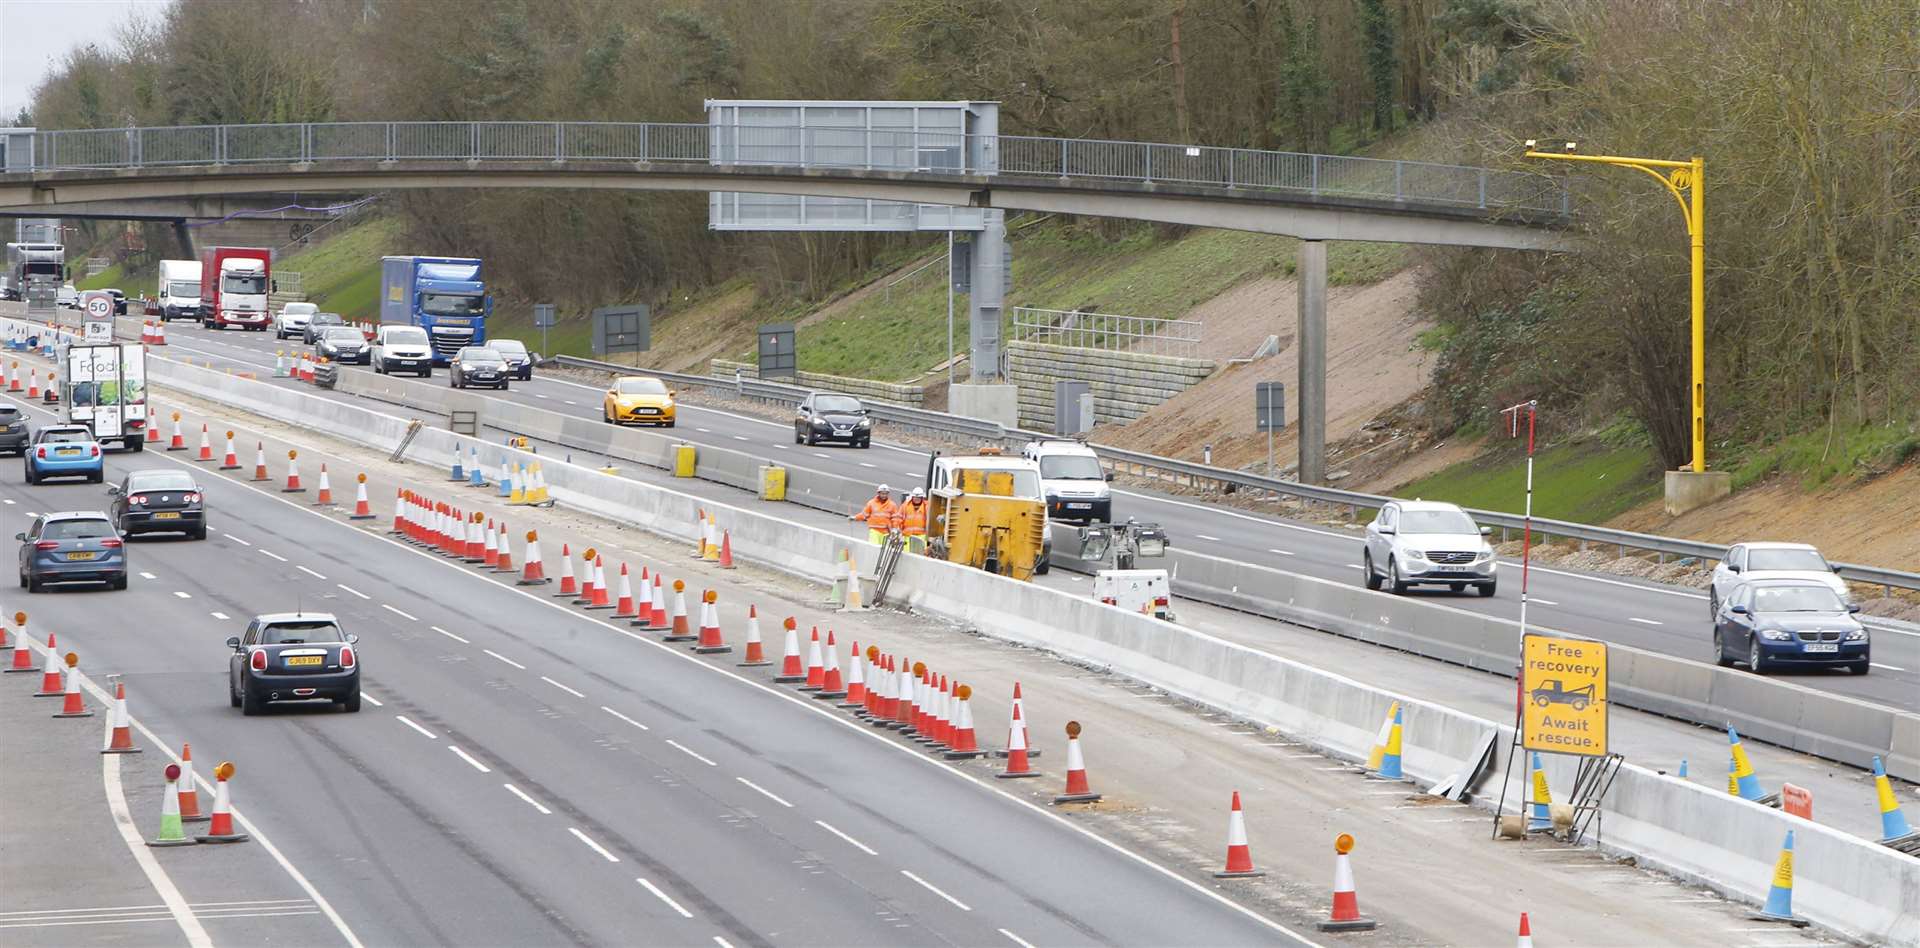 Work to turn the M20 into a Smart Motorway between junction 5 (Aylesford) and junction 4 (Leybourne) Picture: Andy Jones